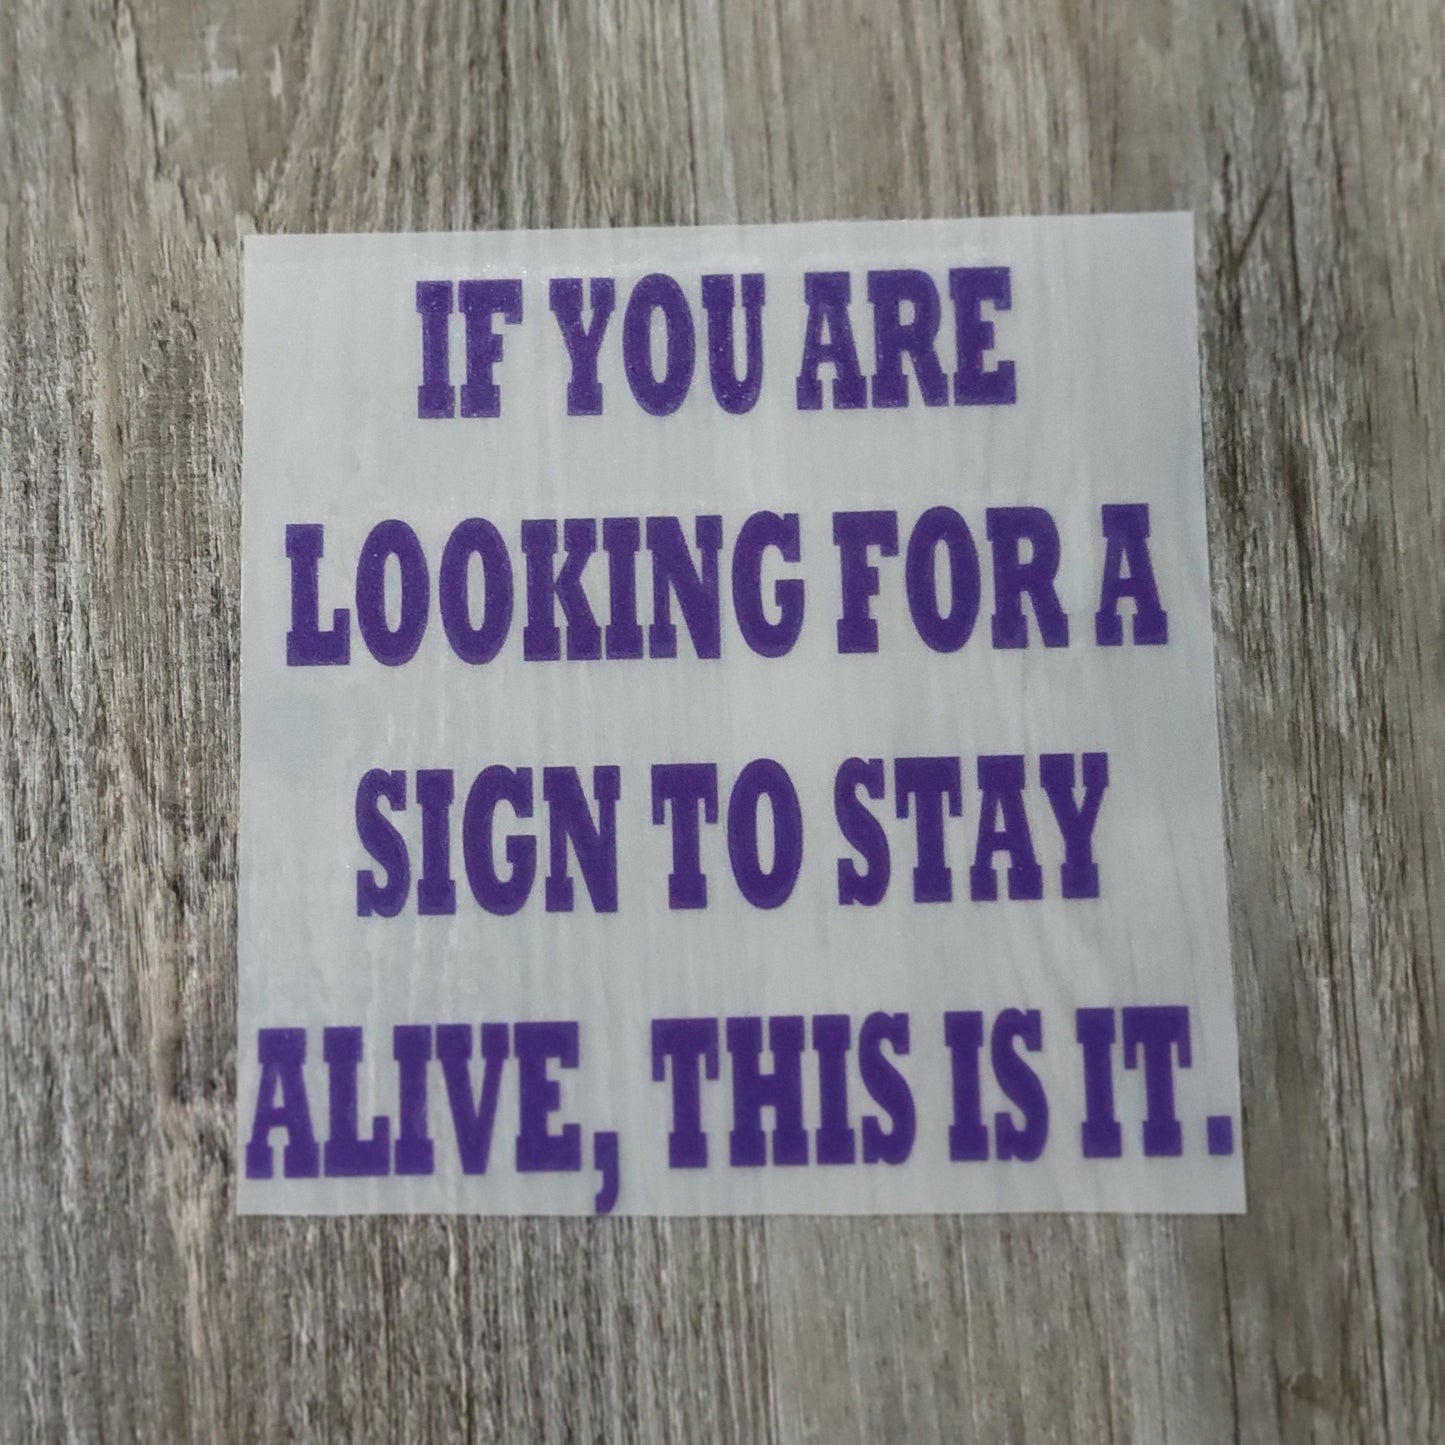 If You Are Looking For A Sign To Stay Alive, This Is It decal